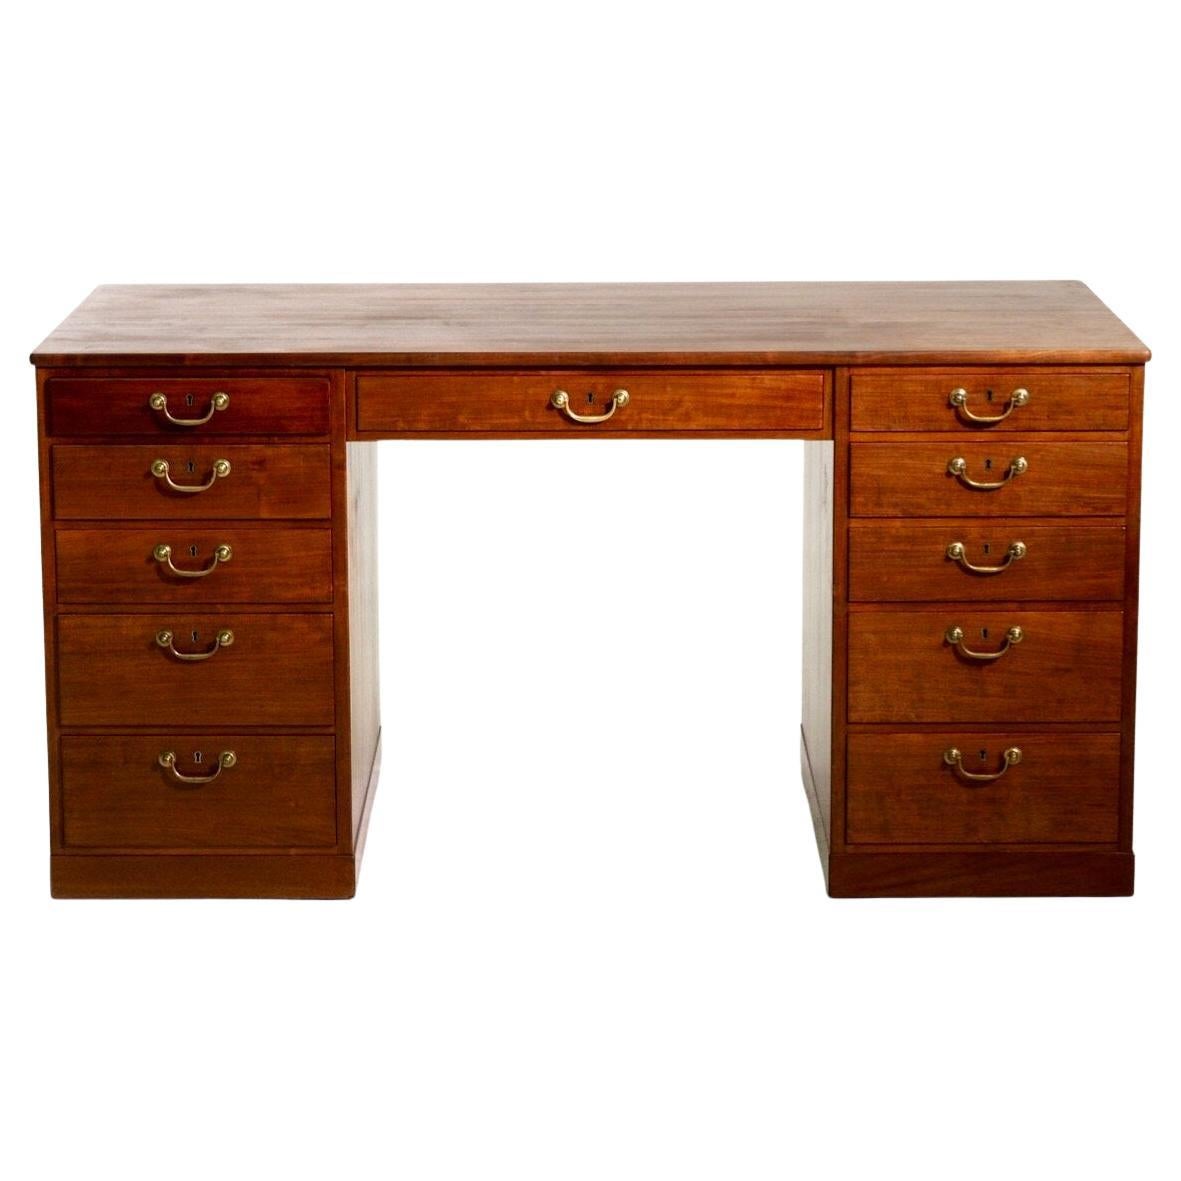 Desk in Mahogany by Ole Wanscher '1903 - 1985' For Sale